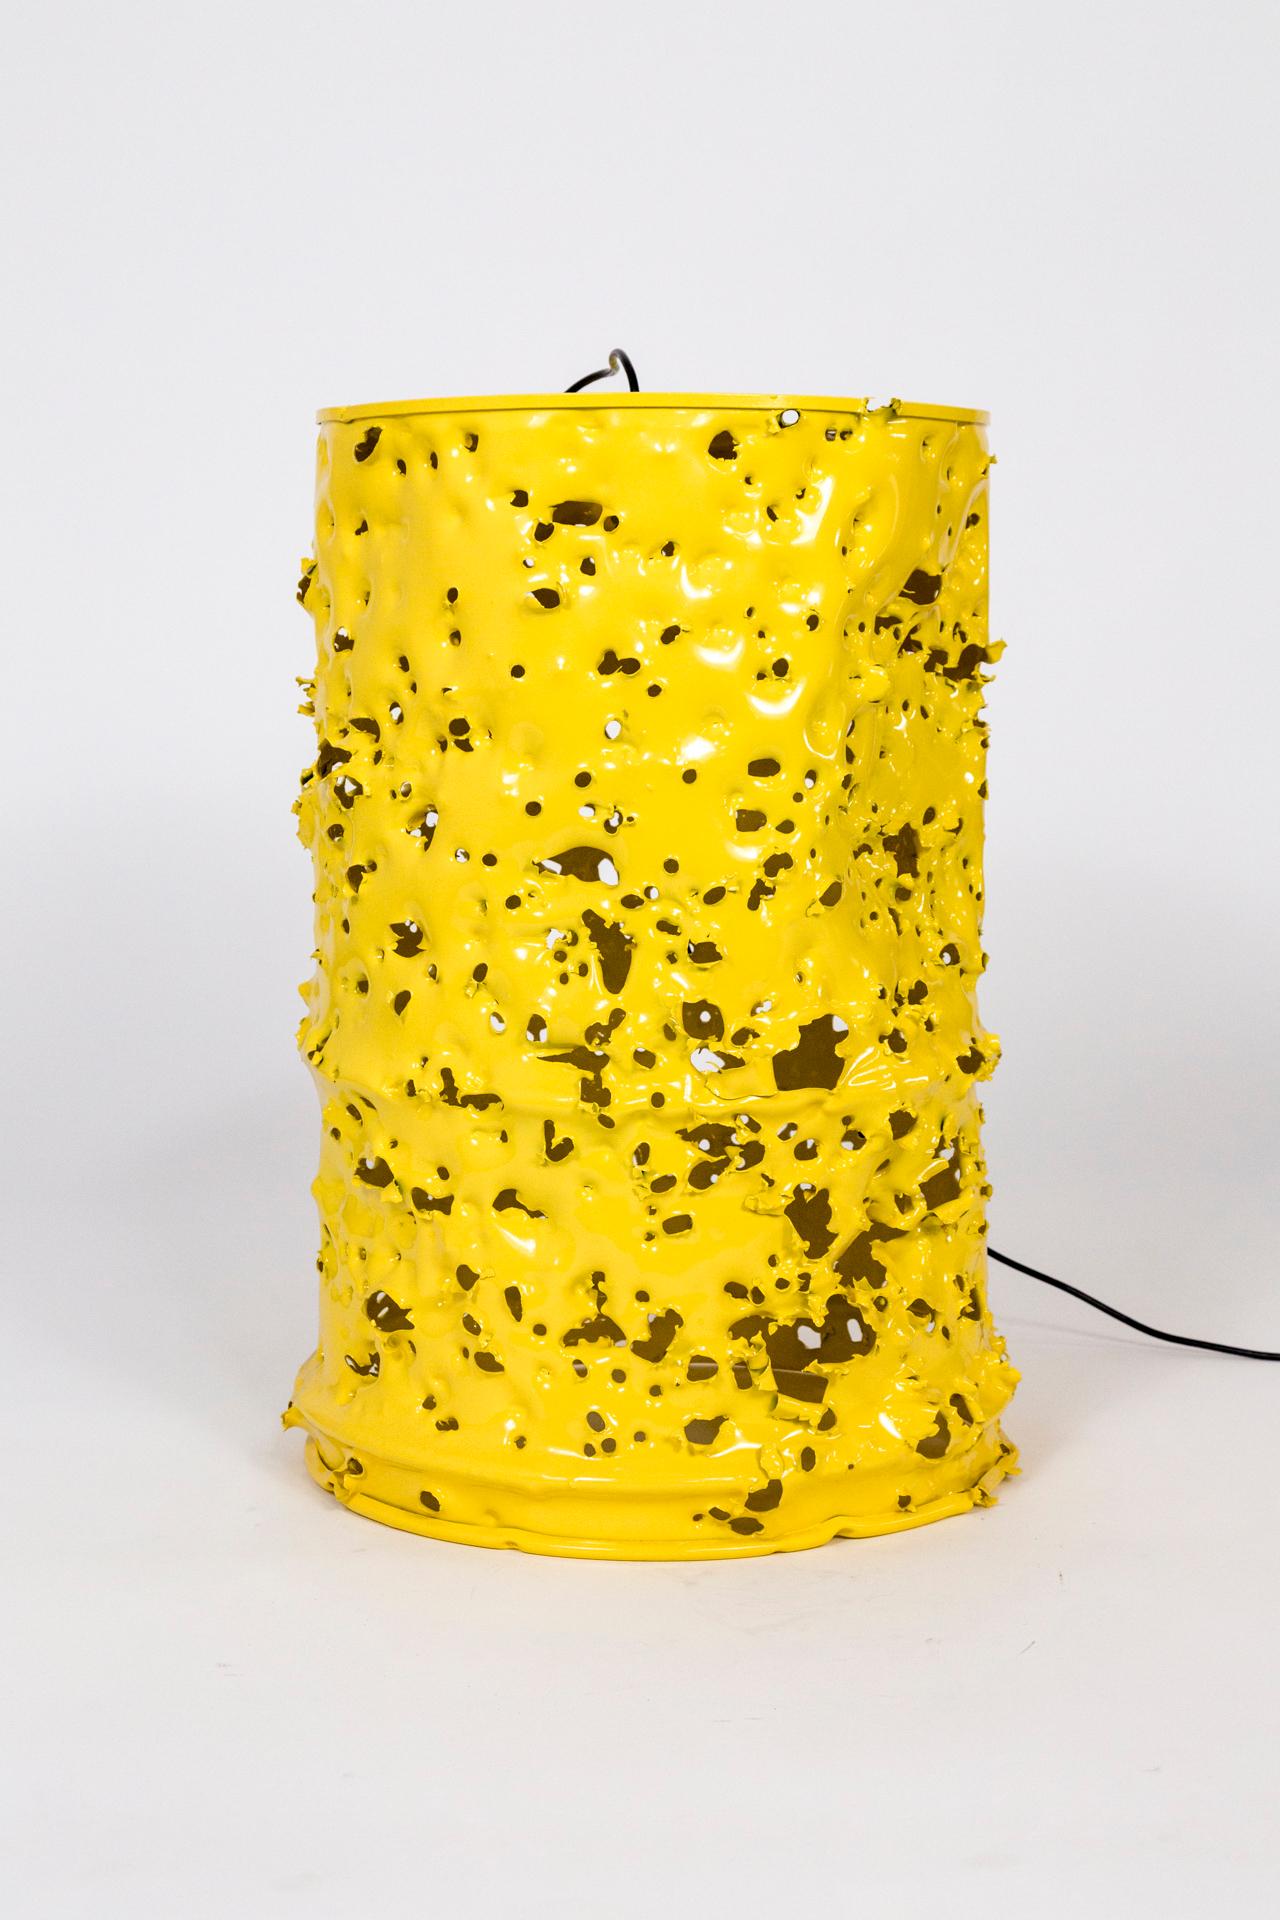 Powder-Coated Huge Yellow Bullet Hole Can Lamp by Charles Linder